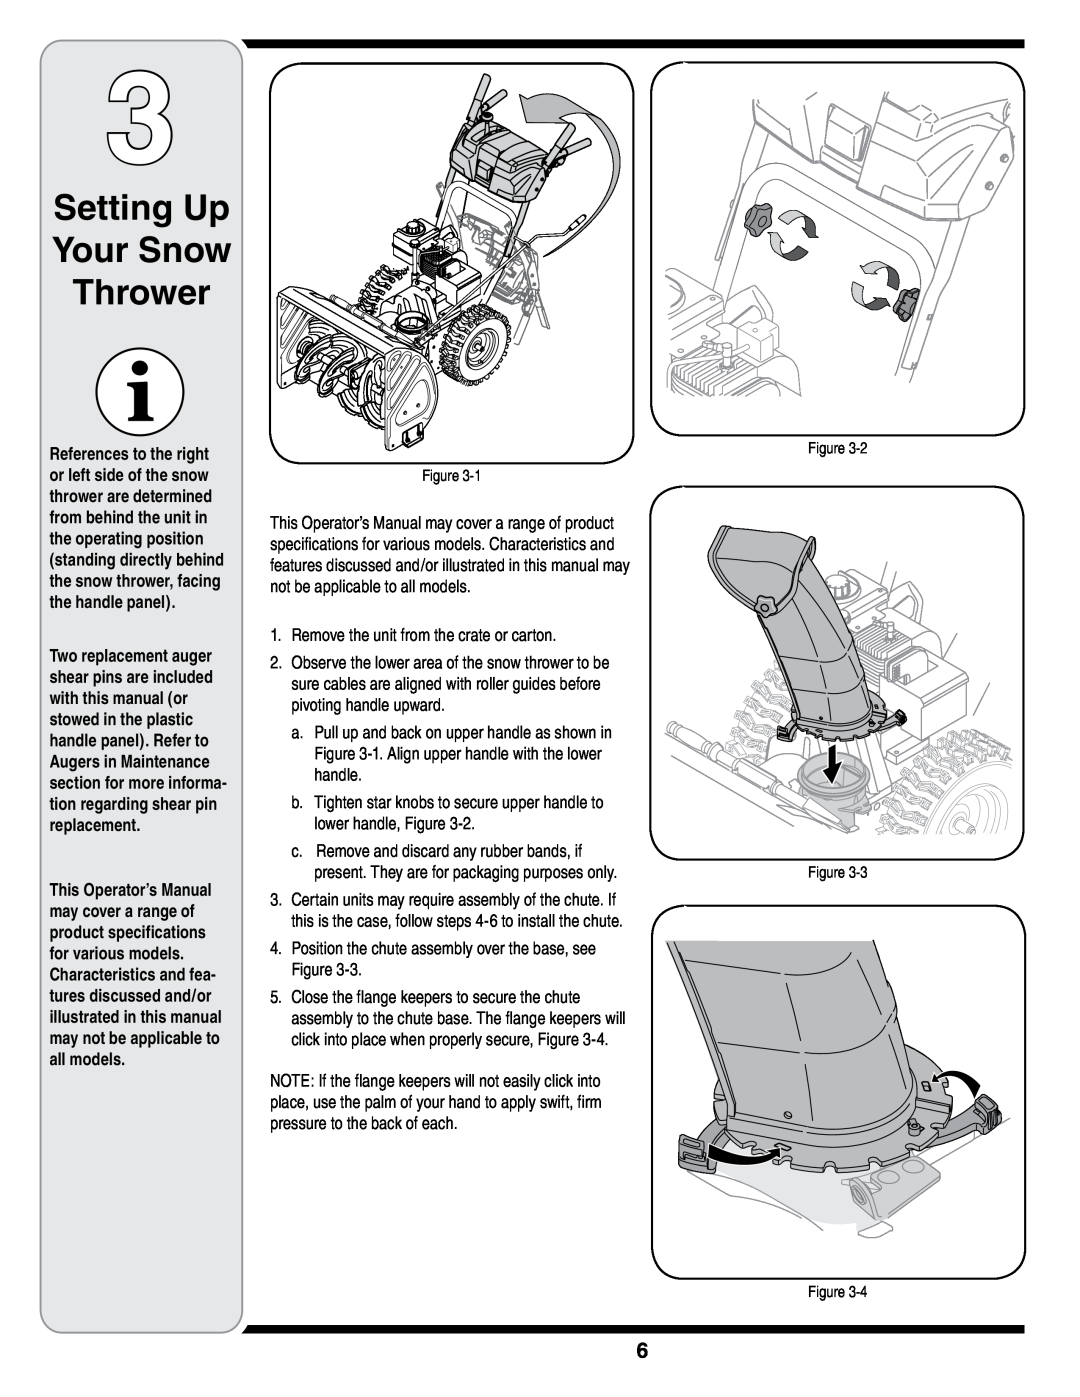 Troy-Bilt STORM Series warranty Setting Up Your Snow Thrower, Remove the unit from the crate or carton 